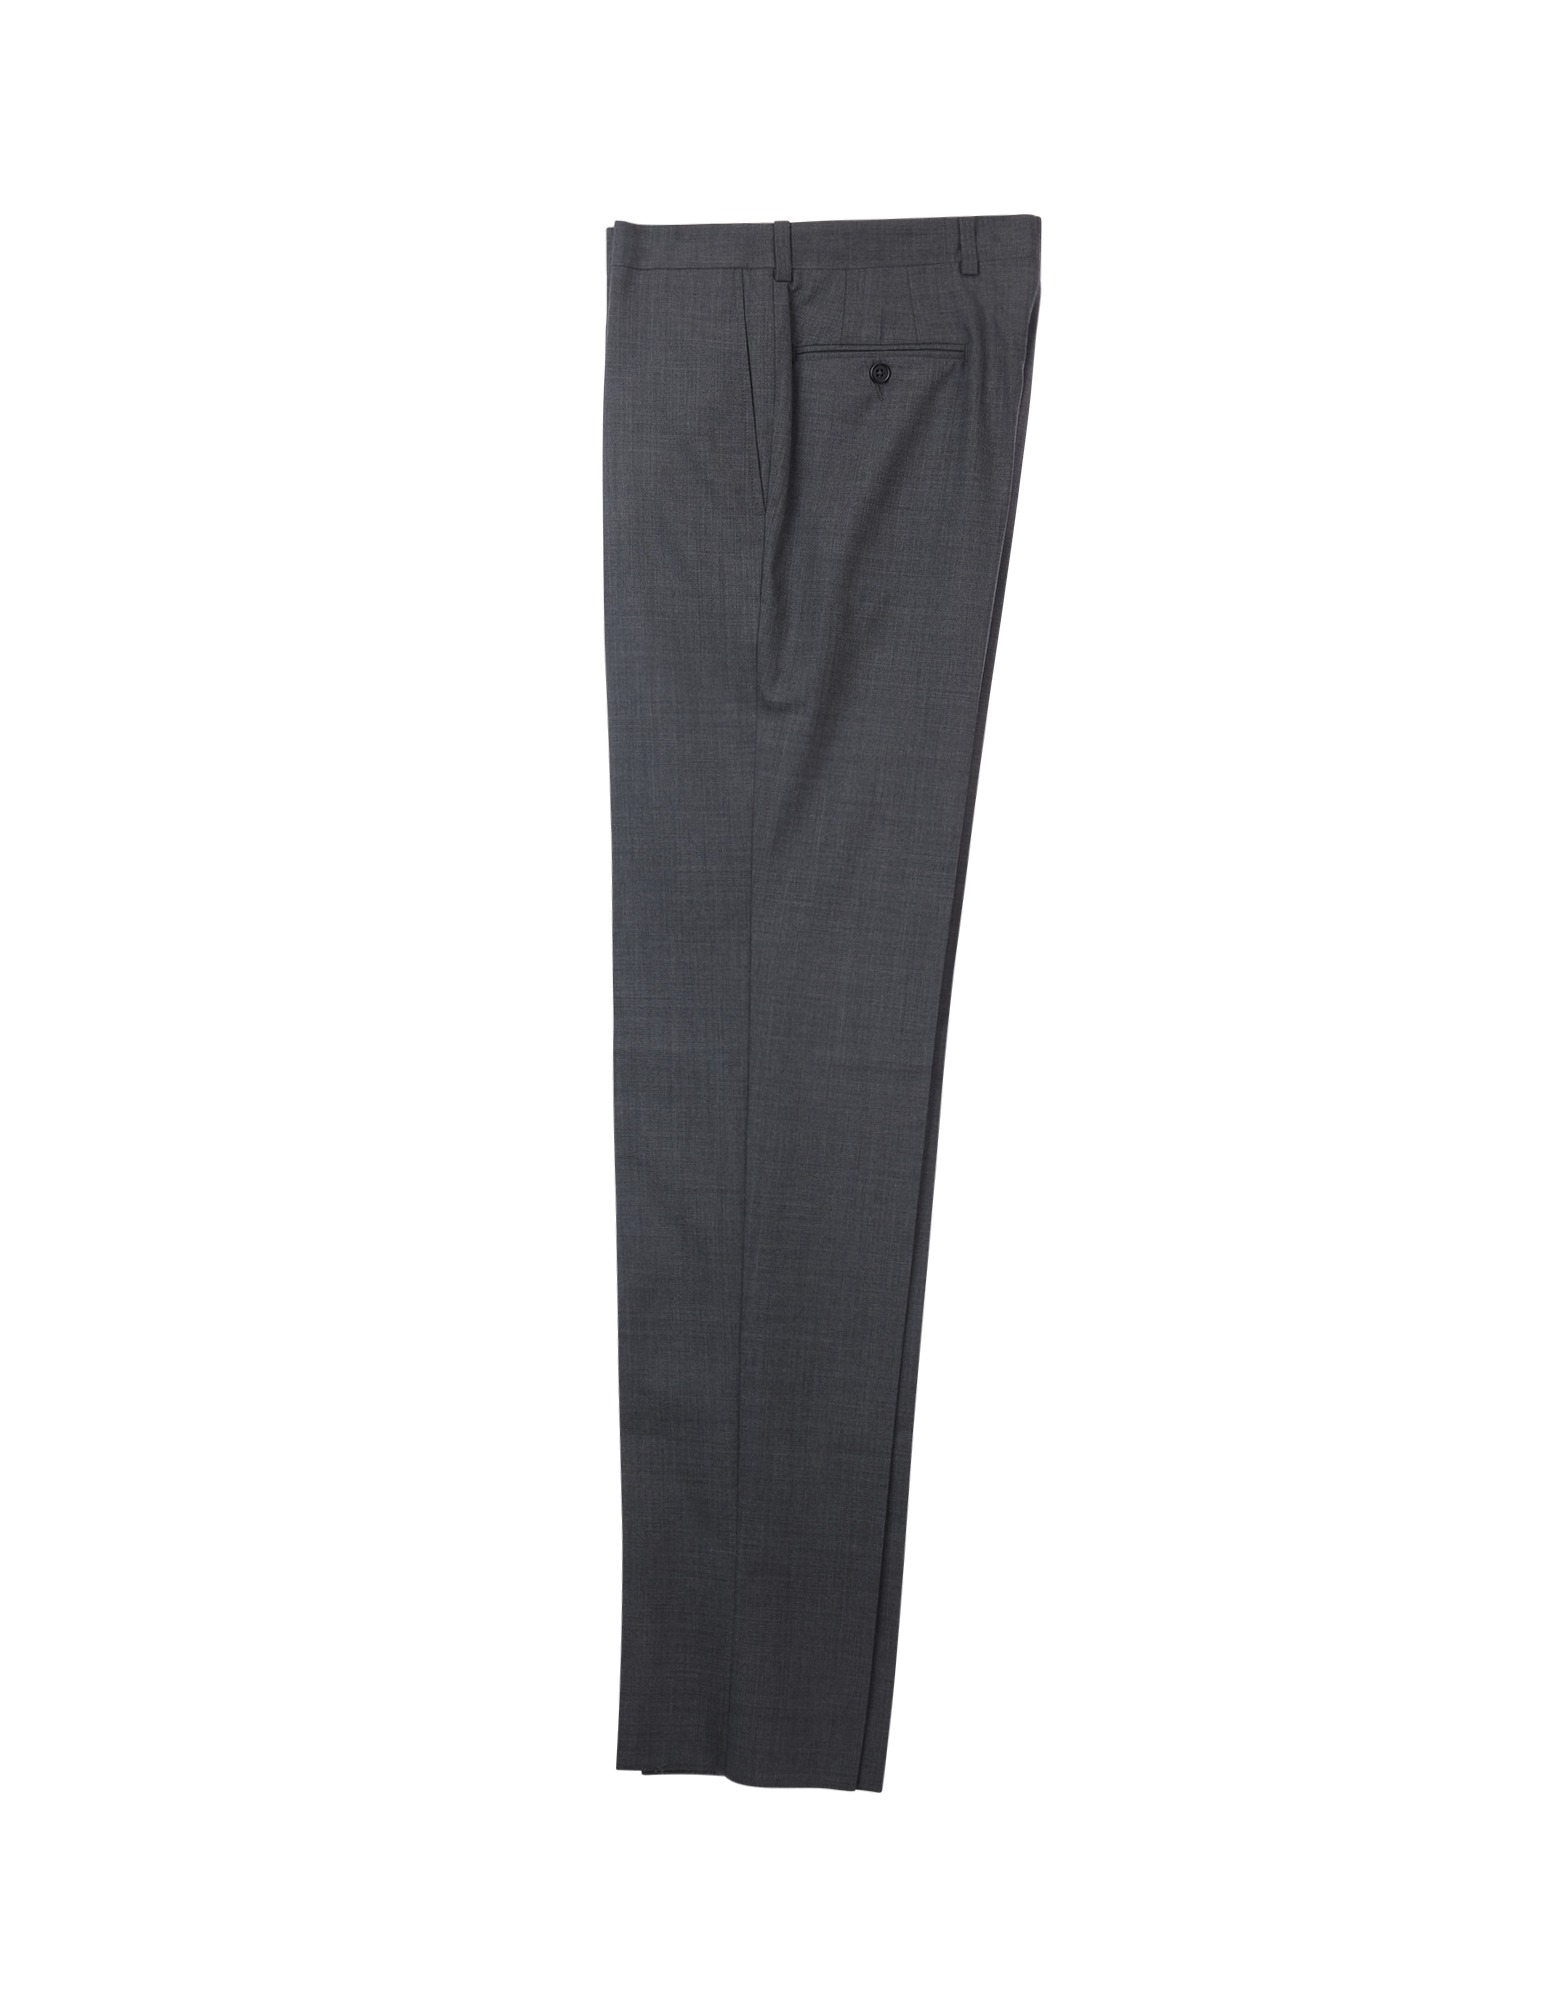 Wool Tropical Trousers (Grey)